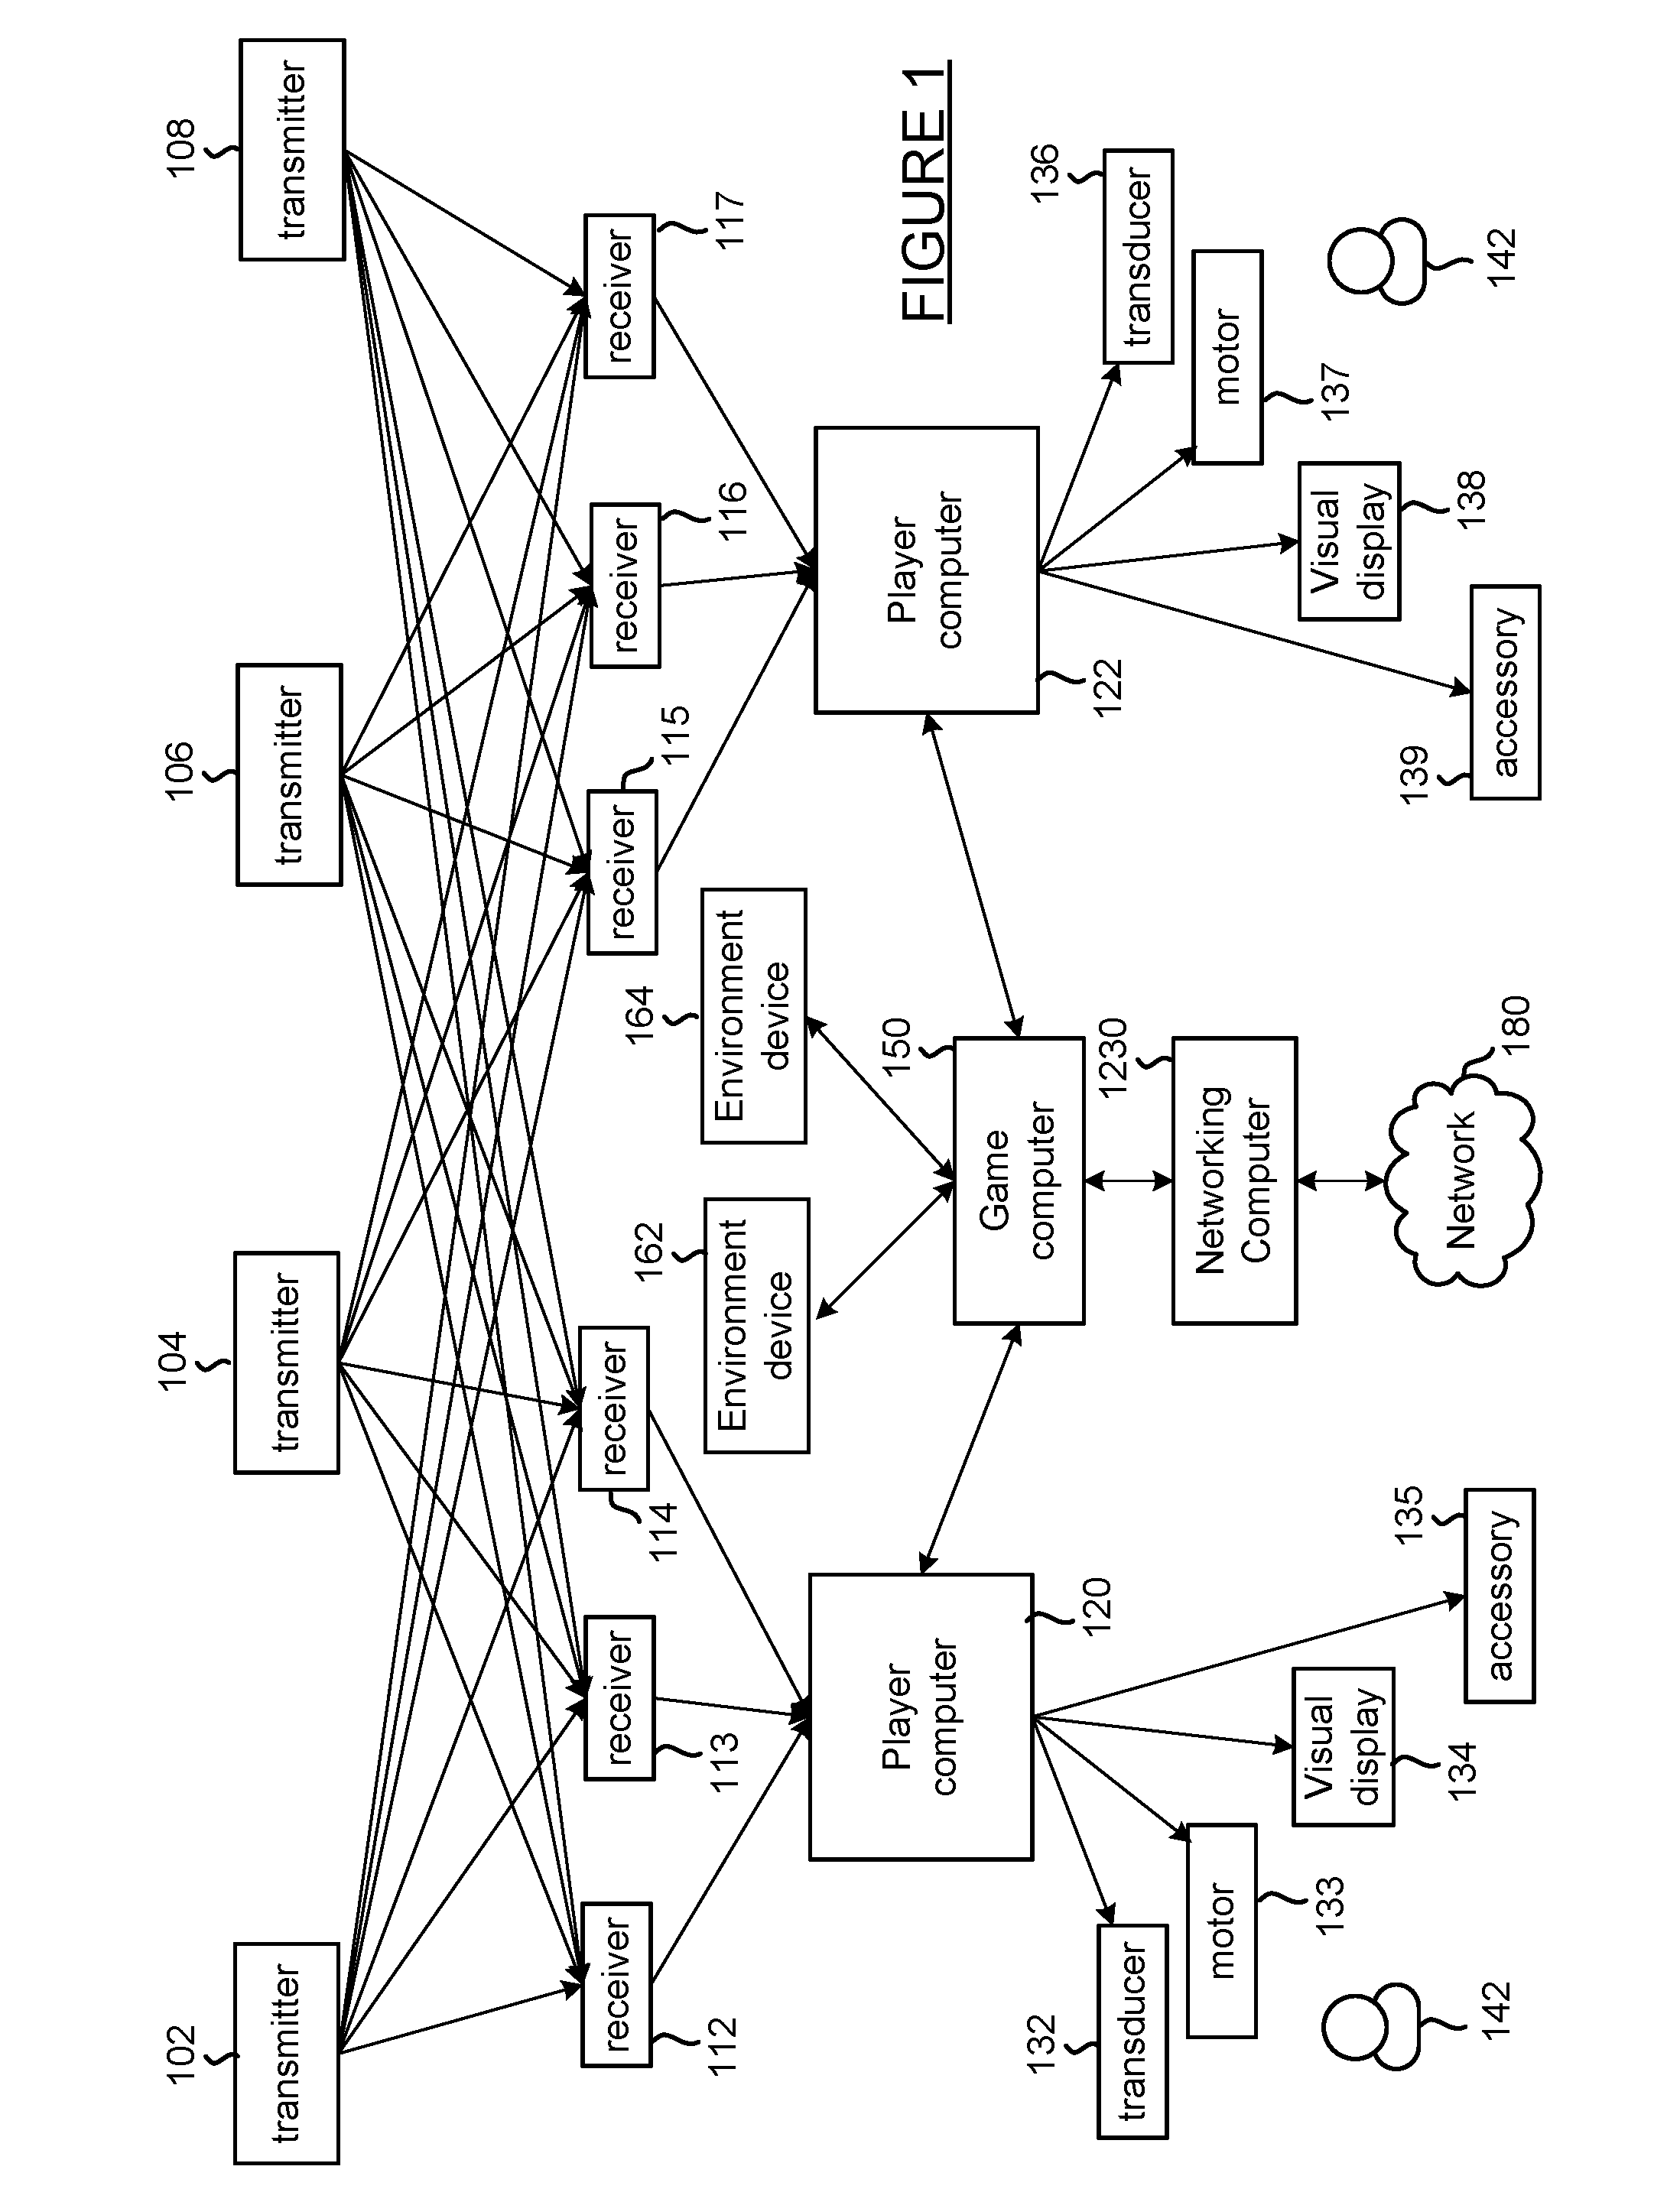 Wideband transmitter for position tracking system in combined virtual and physical environment